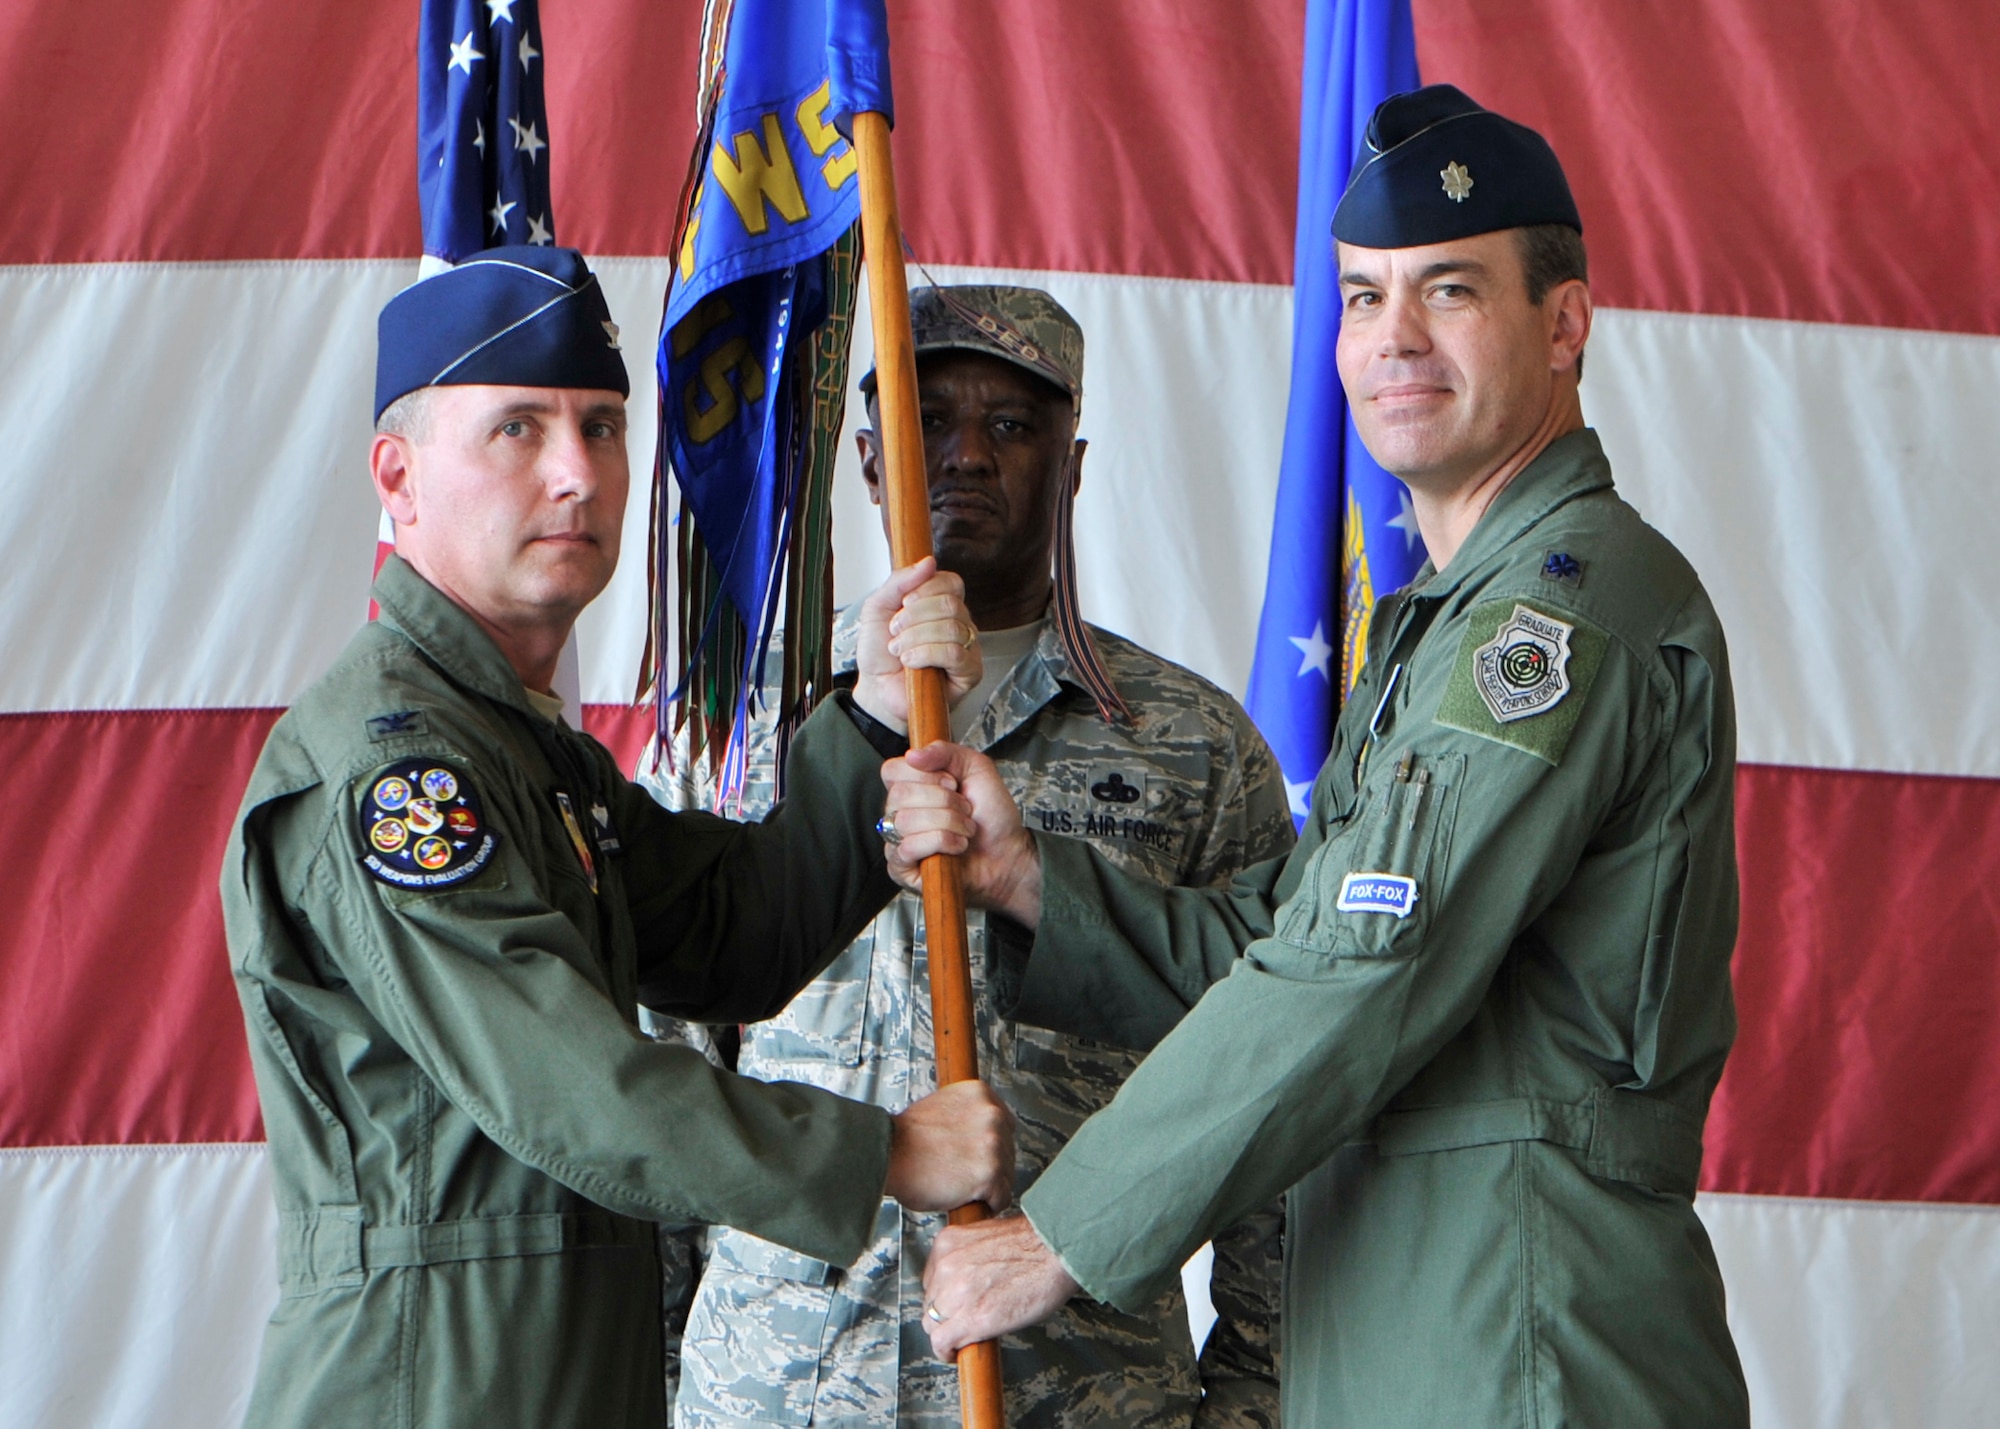 Colonel Scott Ward, 53rd Weapons Evaluation Group commander, passes the 83rd Fighter Weapons Squadron guidon to Lt. Col. Matthew Bradley who assumed command of the 83rd FWS in a change of command ceremony June 30, as Chief Master Sgt. John Thomas, 83rd FWS superintendent looks on. (U.S. Air Force photo by Airman 1st Class Sergio Gamboa)